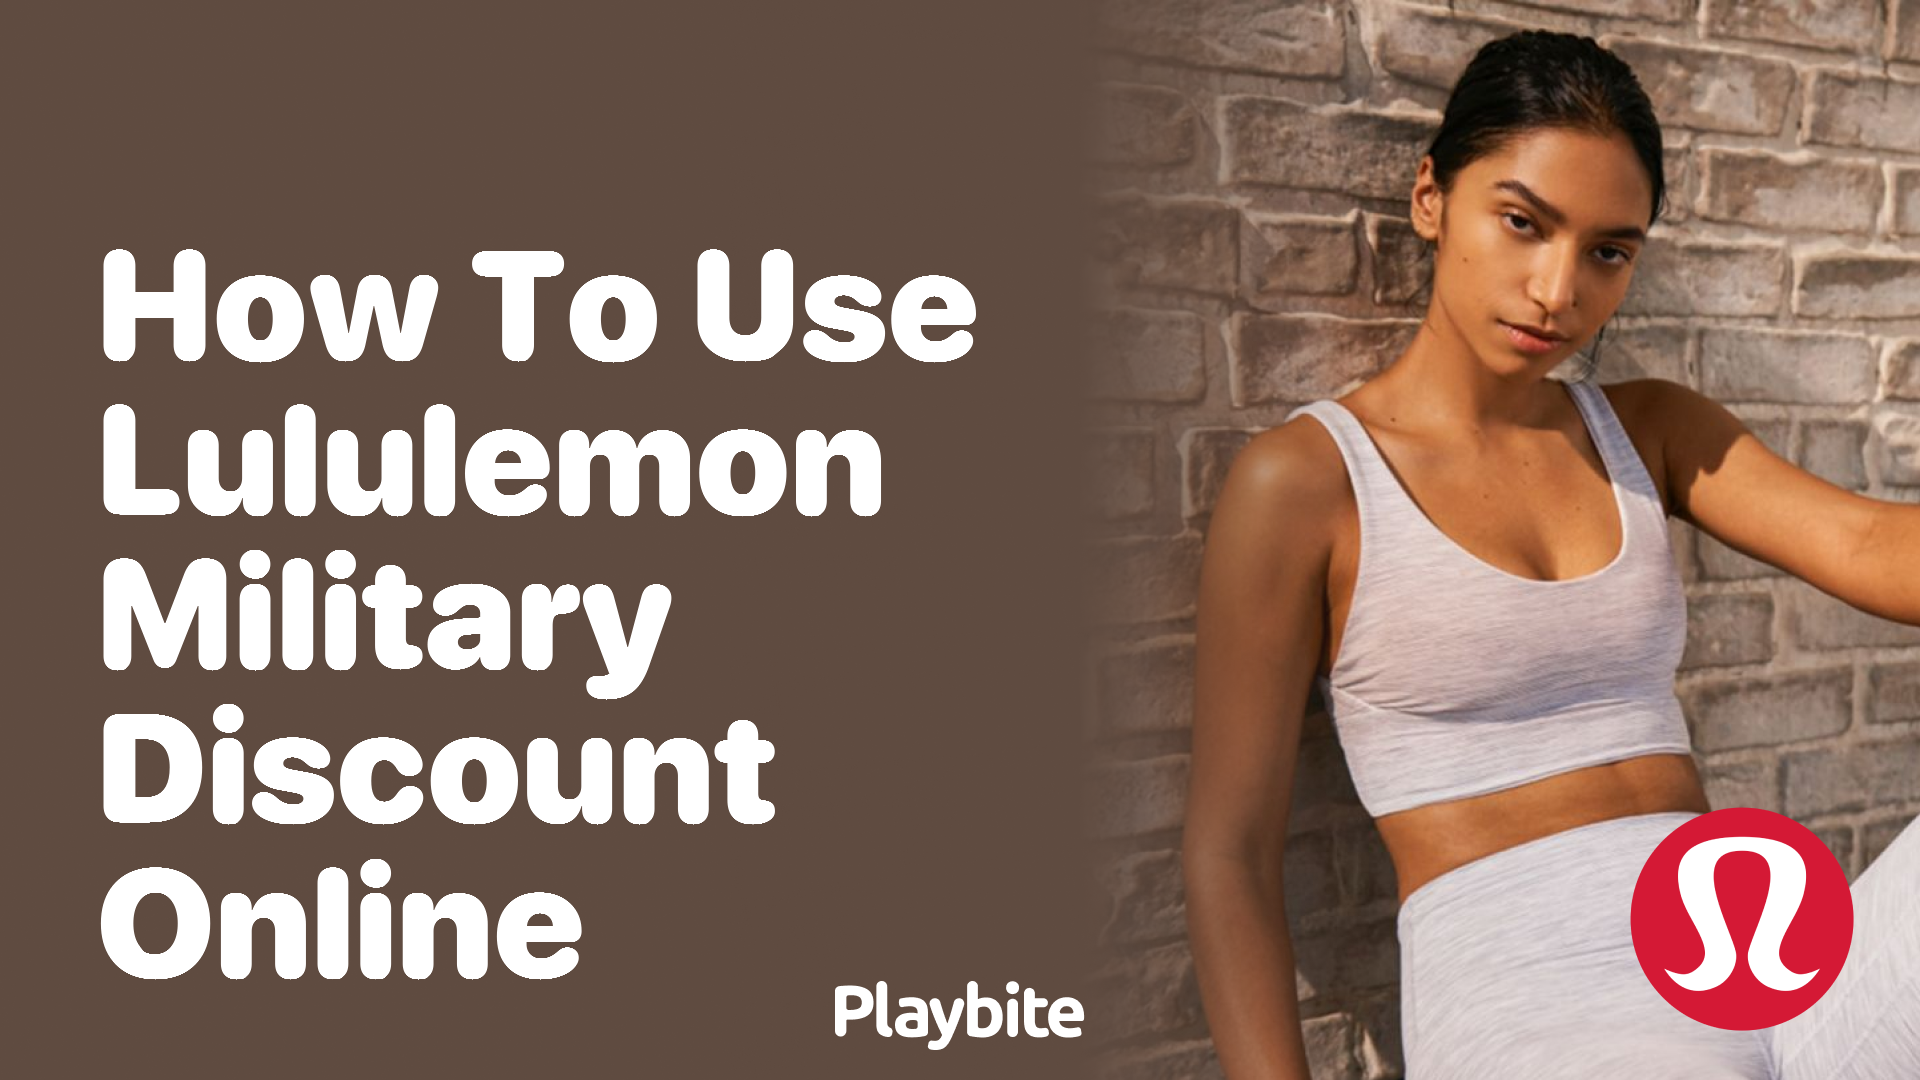 How to Use Lululemon Military Discount Online - Playbite